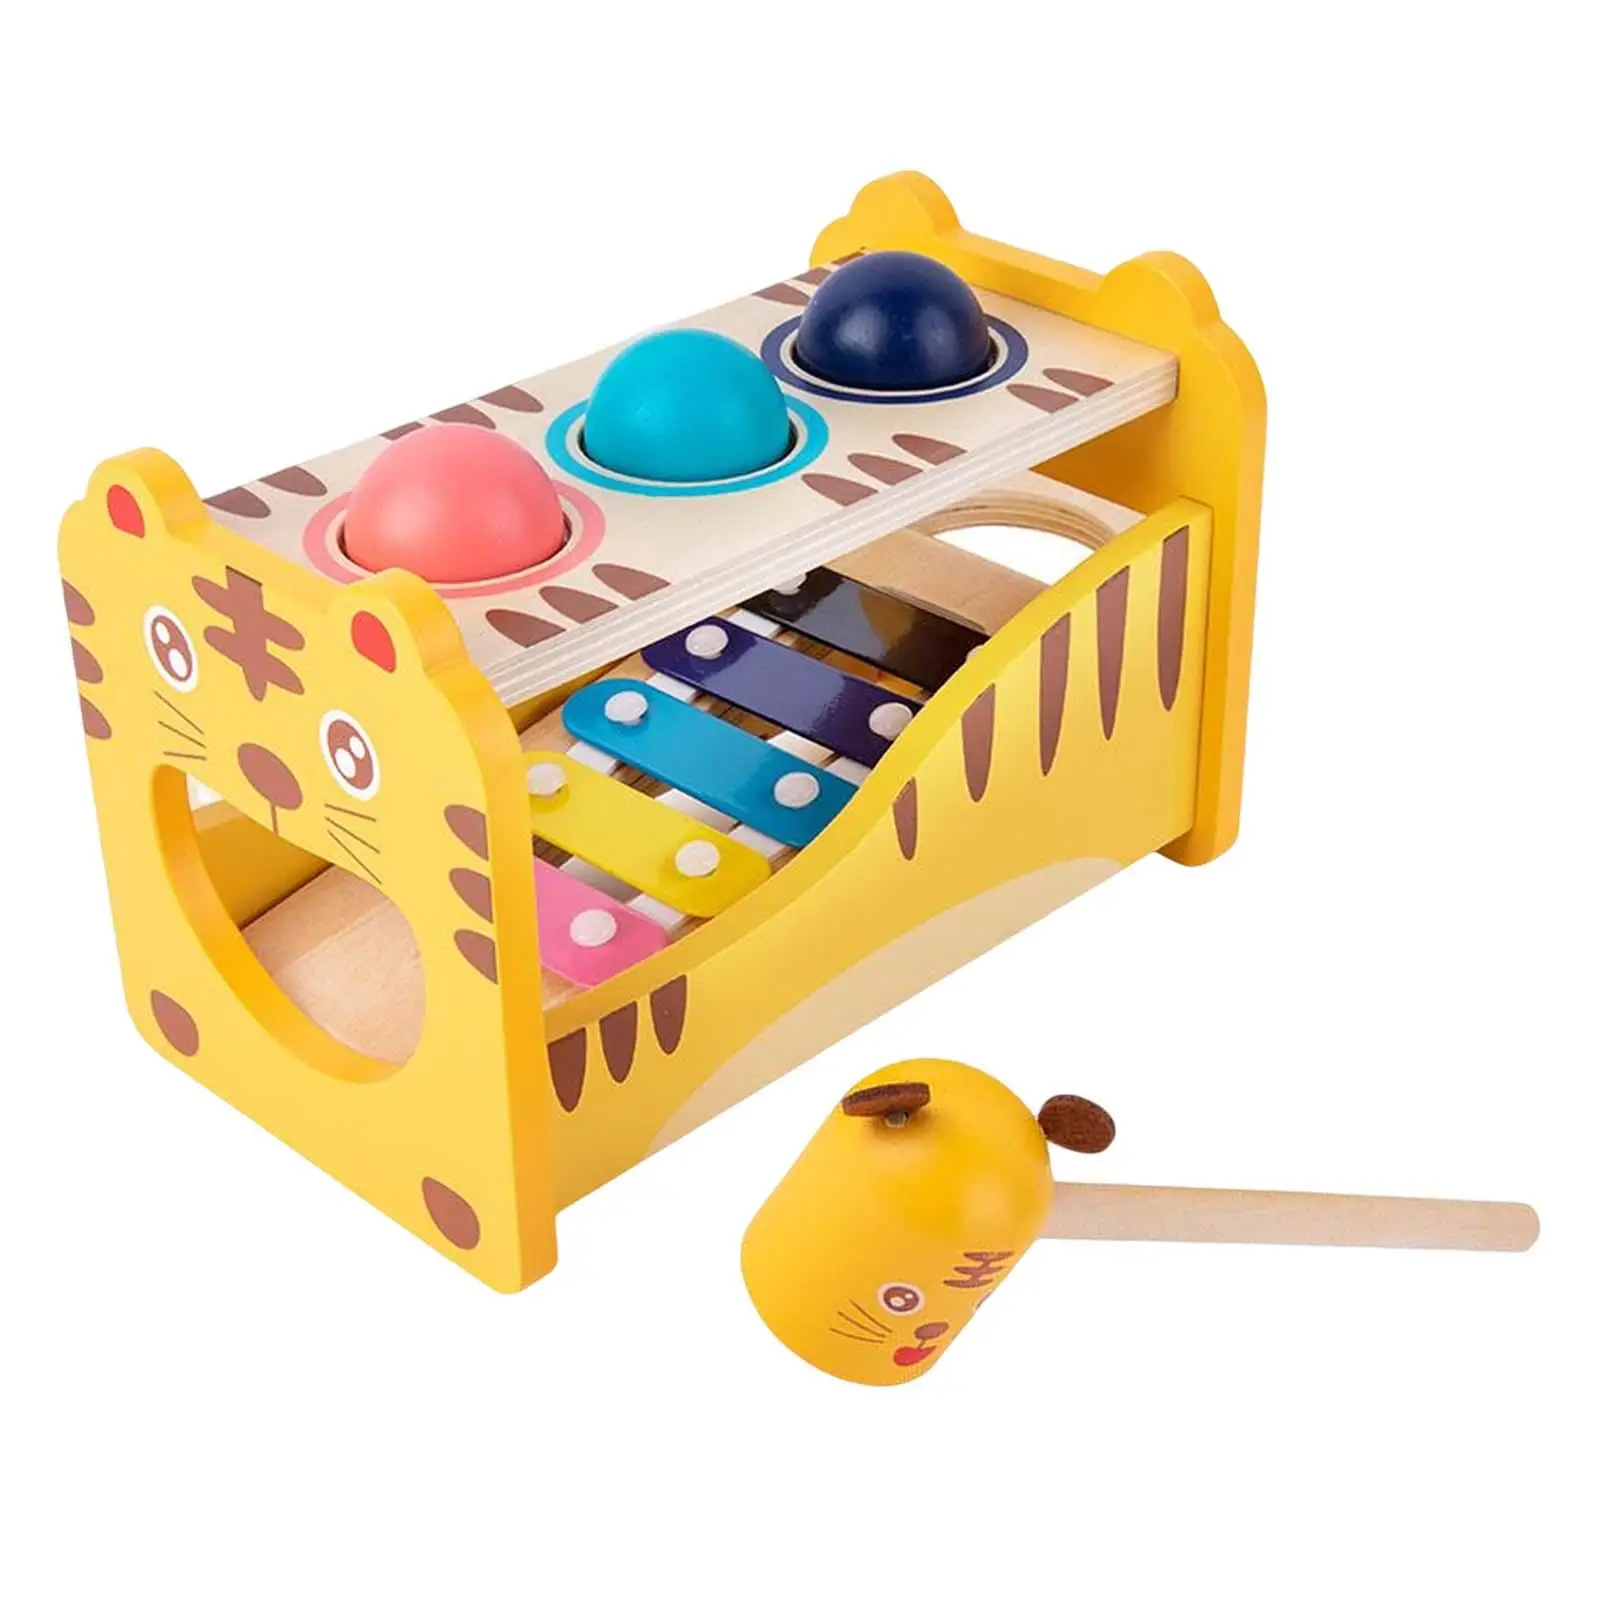 Wooden Musical Pounding Toy Musical Instrument Toys Tap benches with Slide Out Xylophone Hammering Toys for Girl